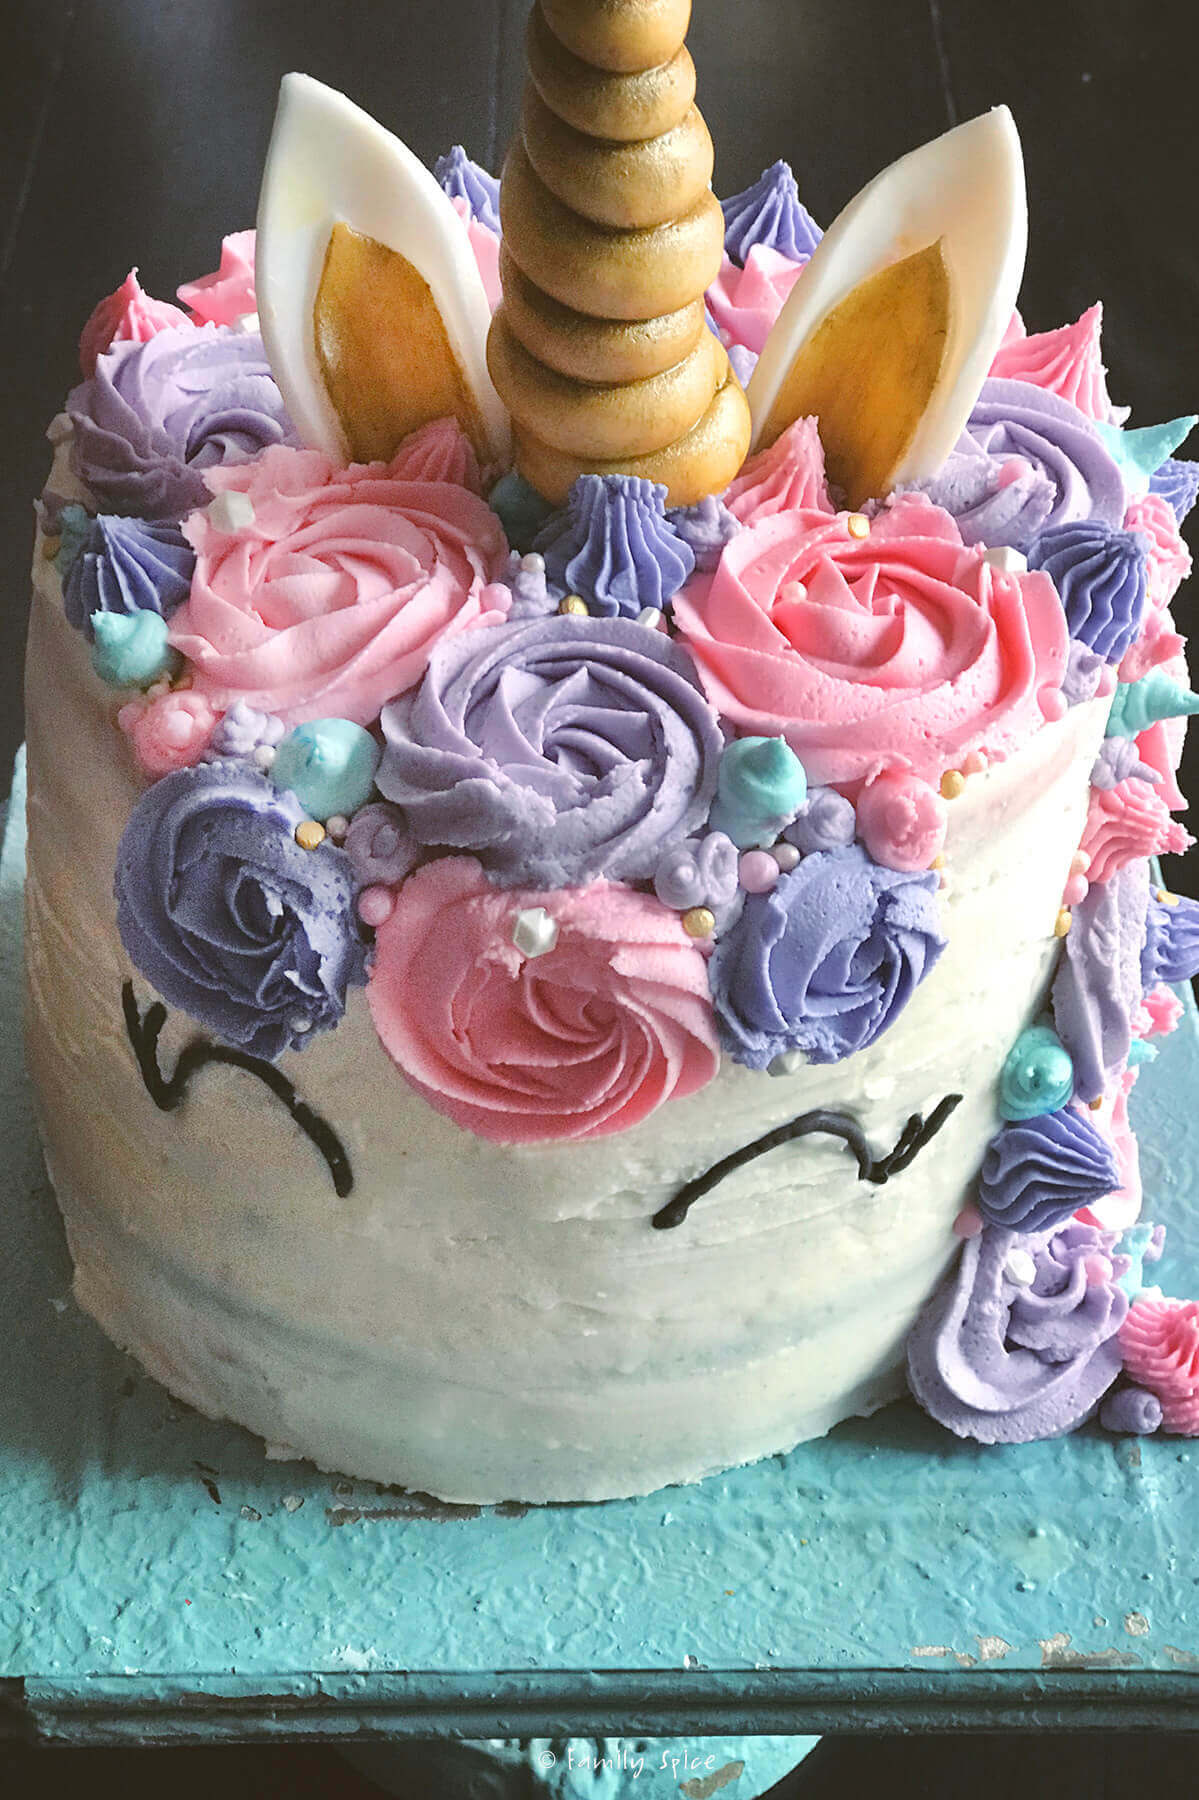 Top front view of pink, purple and blue swirls for unicorn cake